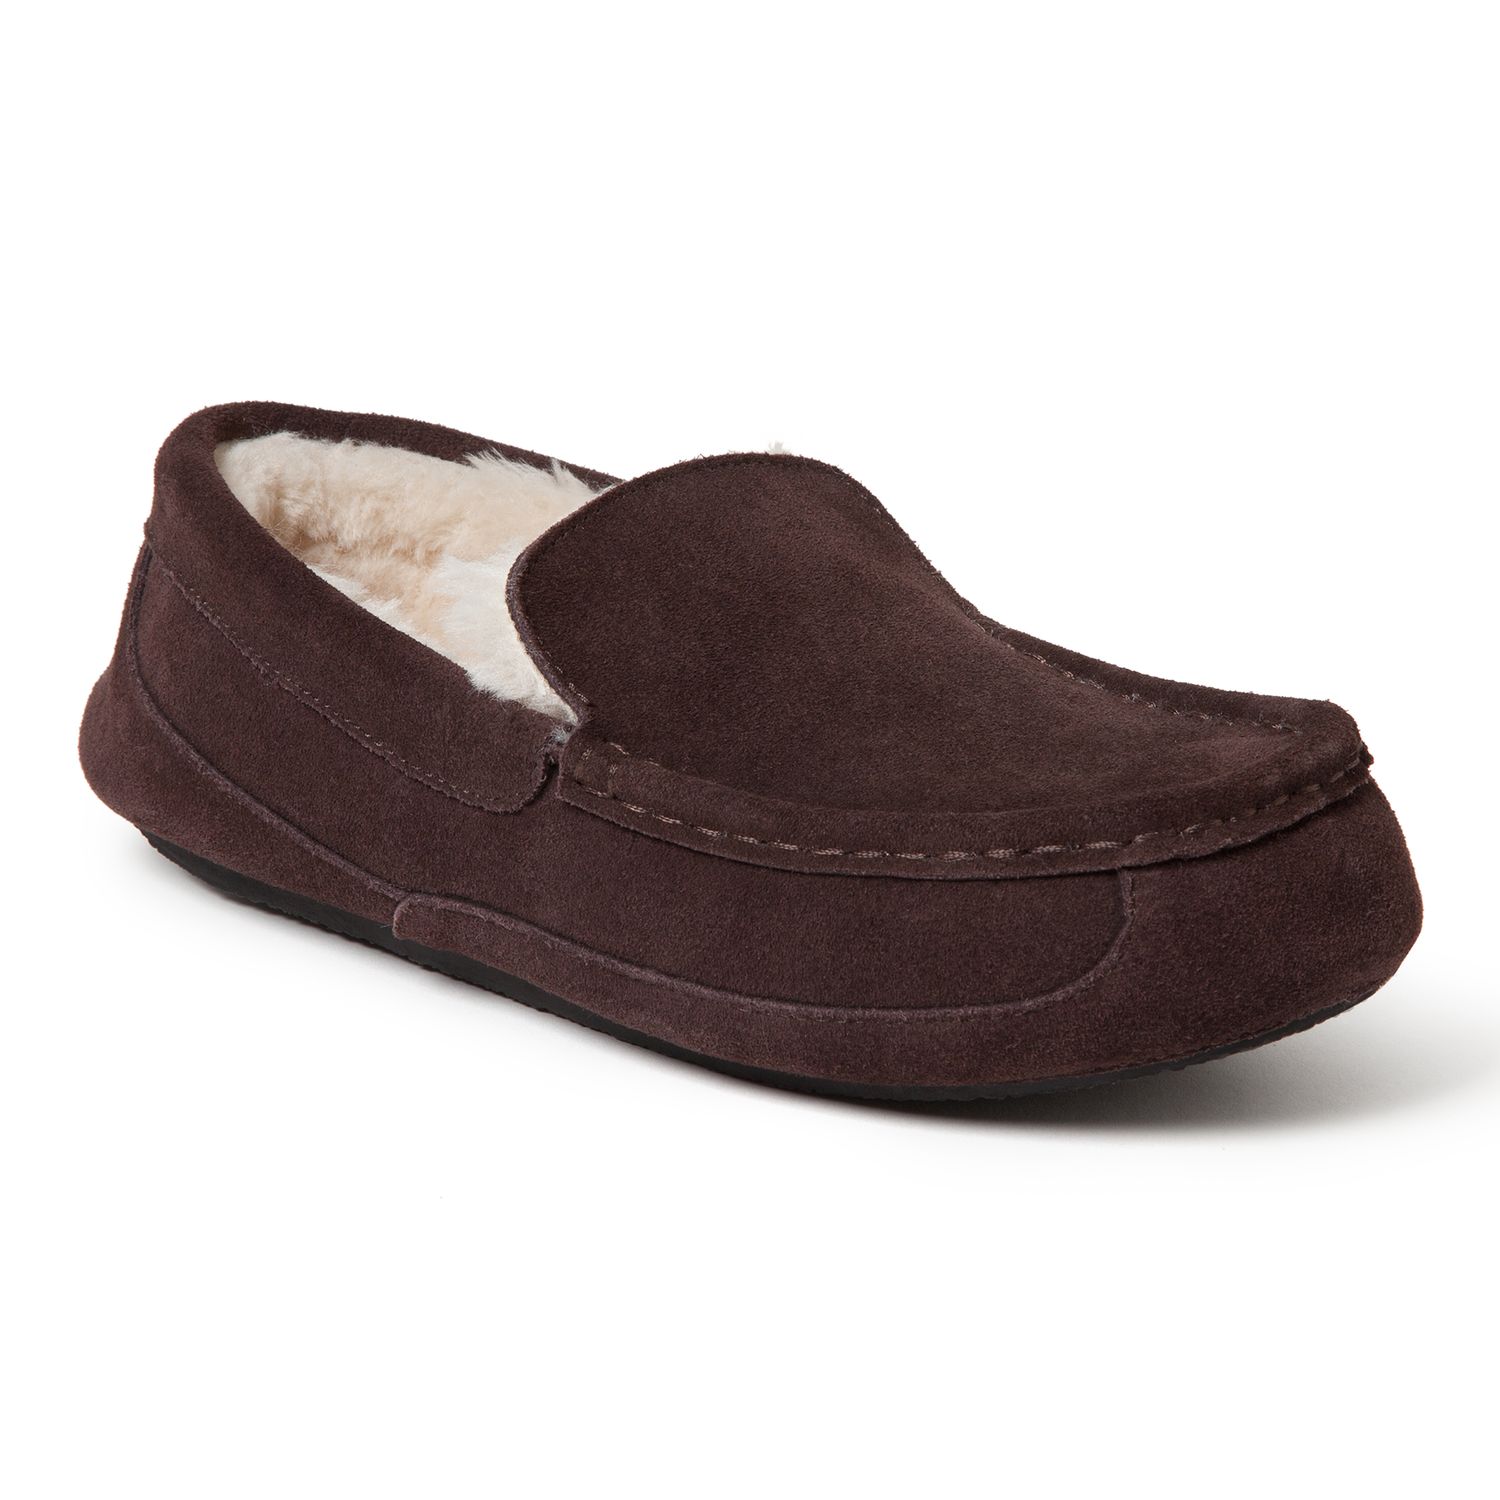 mens slippers moccasin style